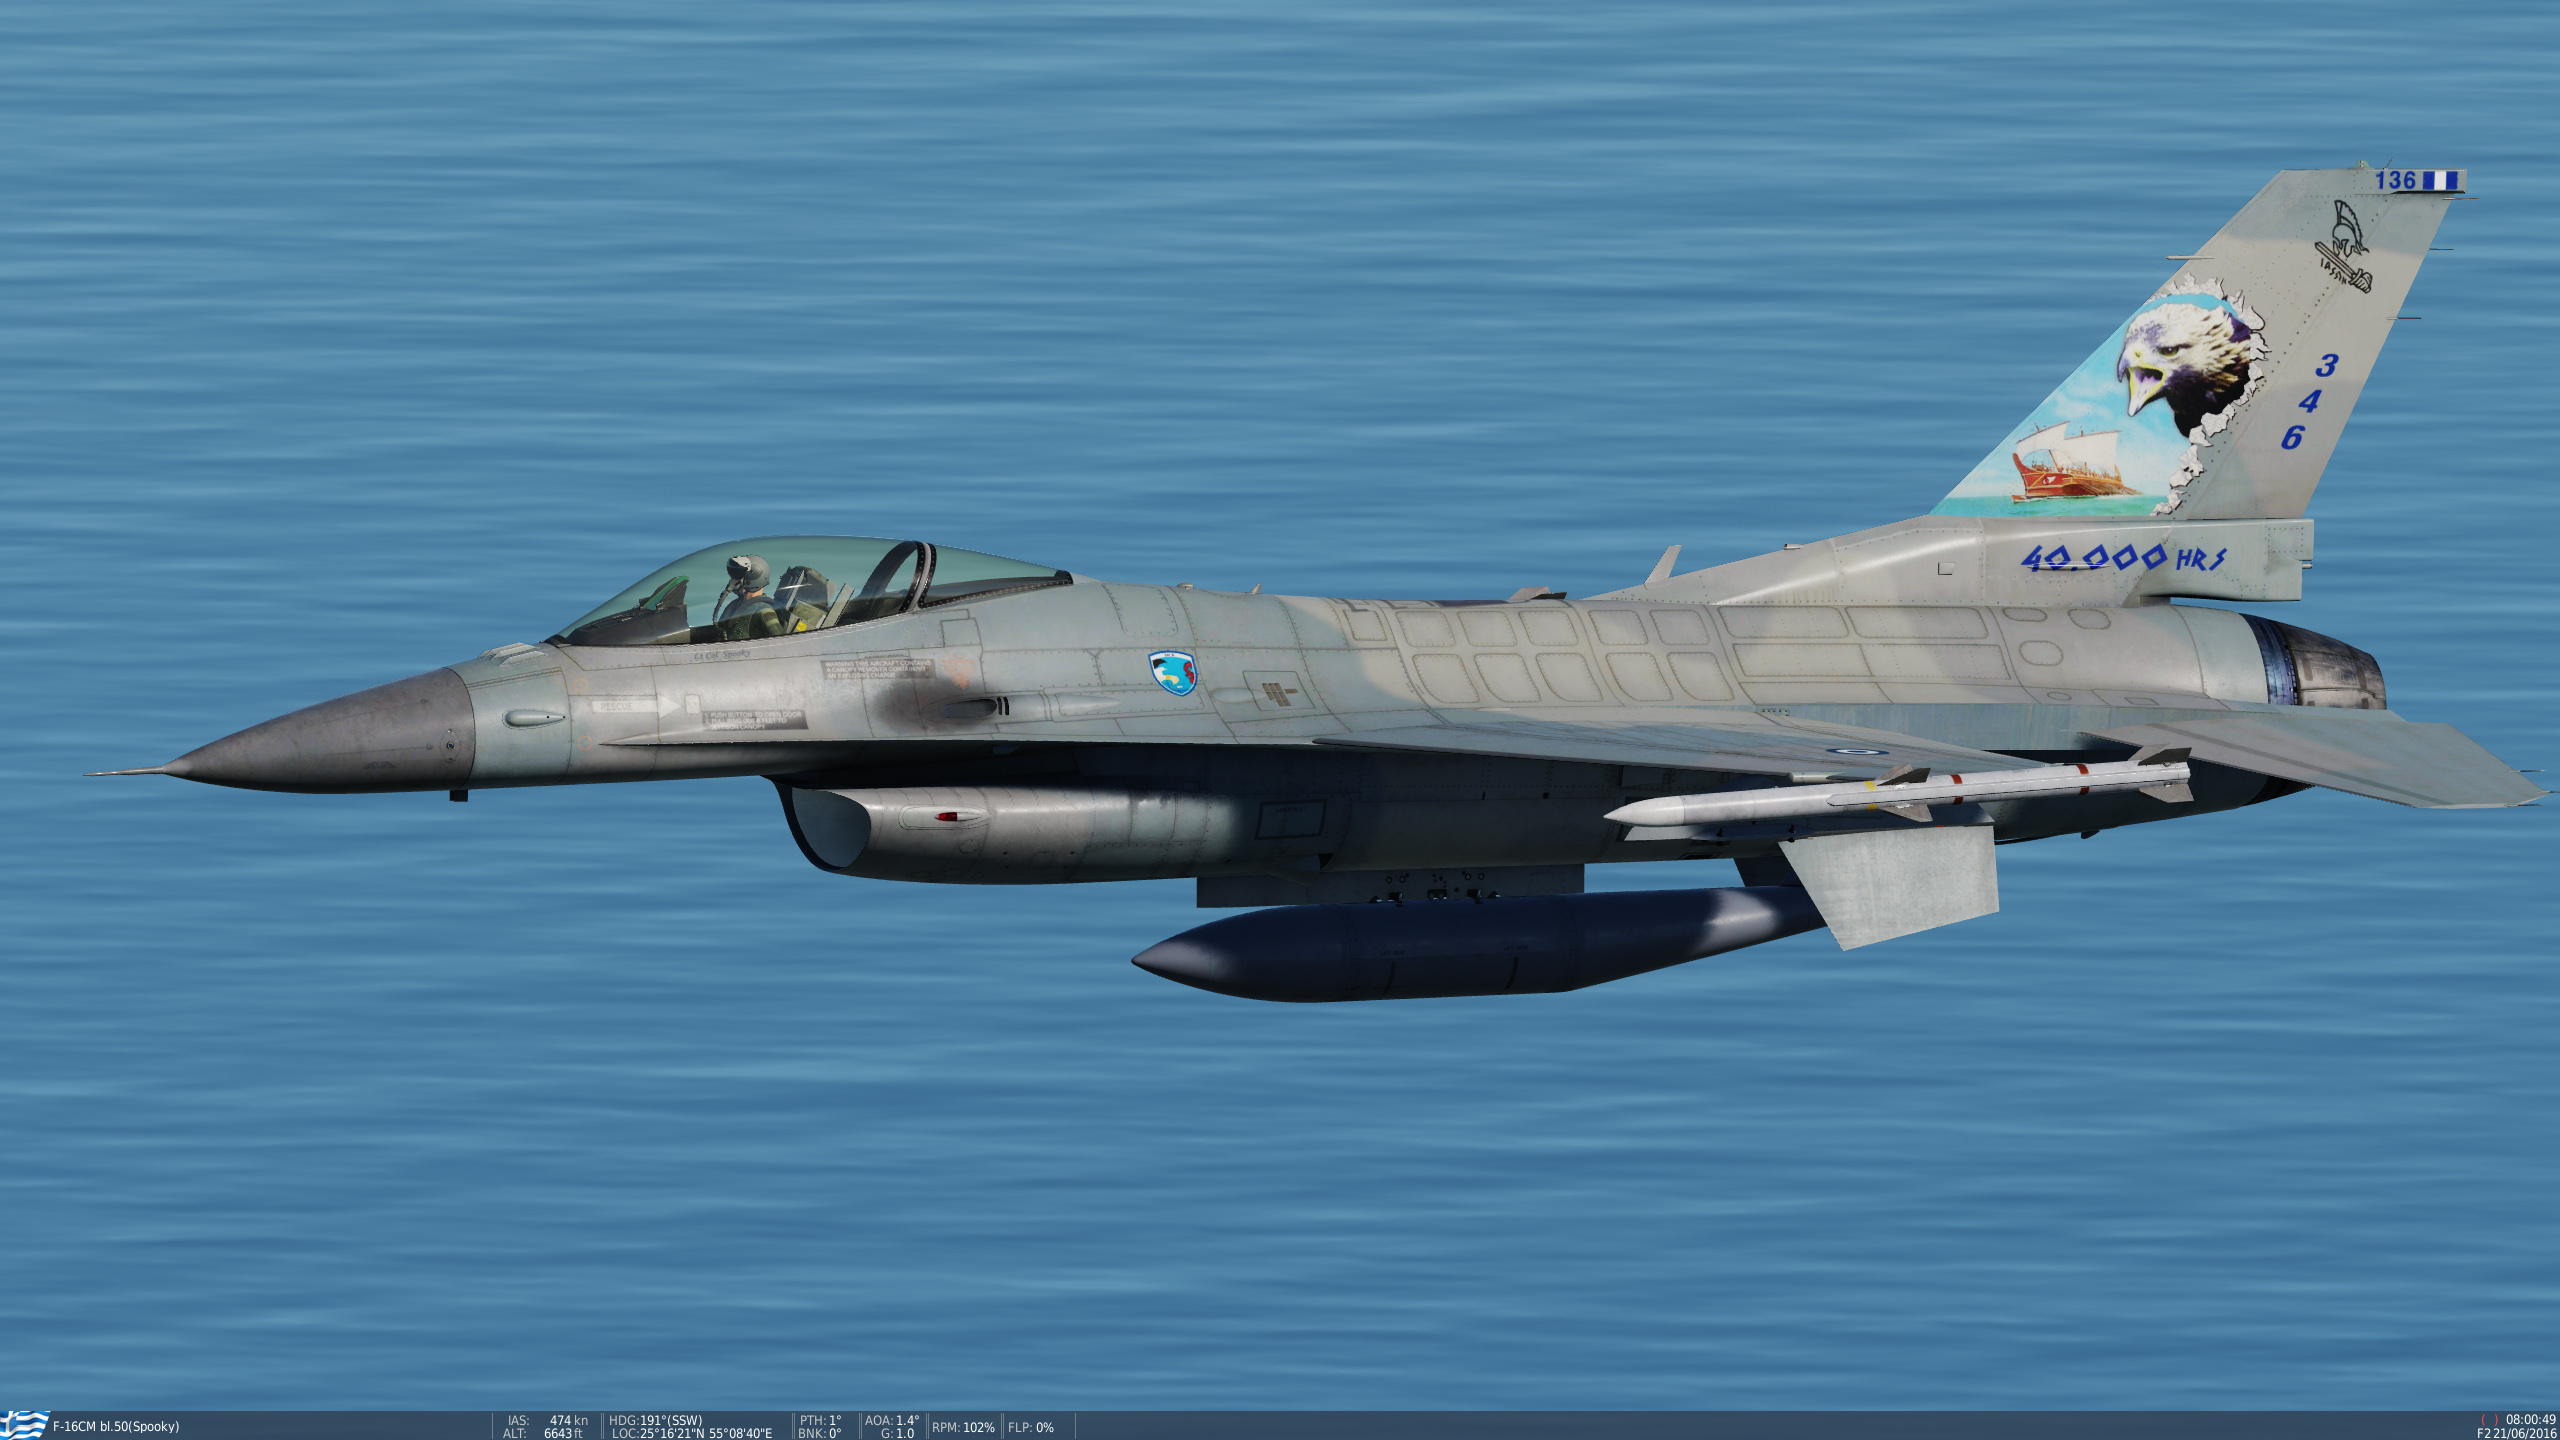 Hellenic Air Force F-16C 346 SQN "IASON" (40K hrs ANNIVERSARY) **UPDATED**